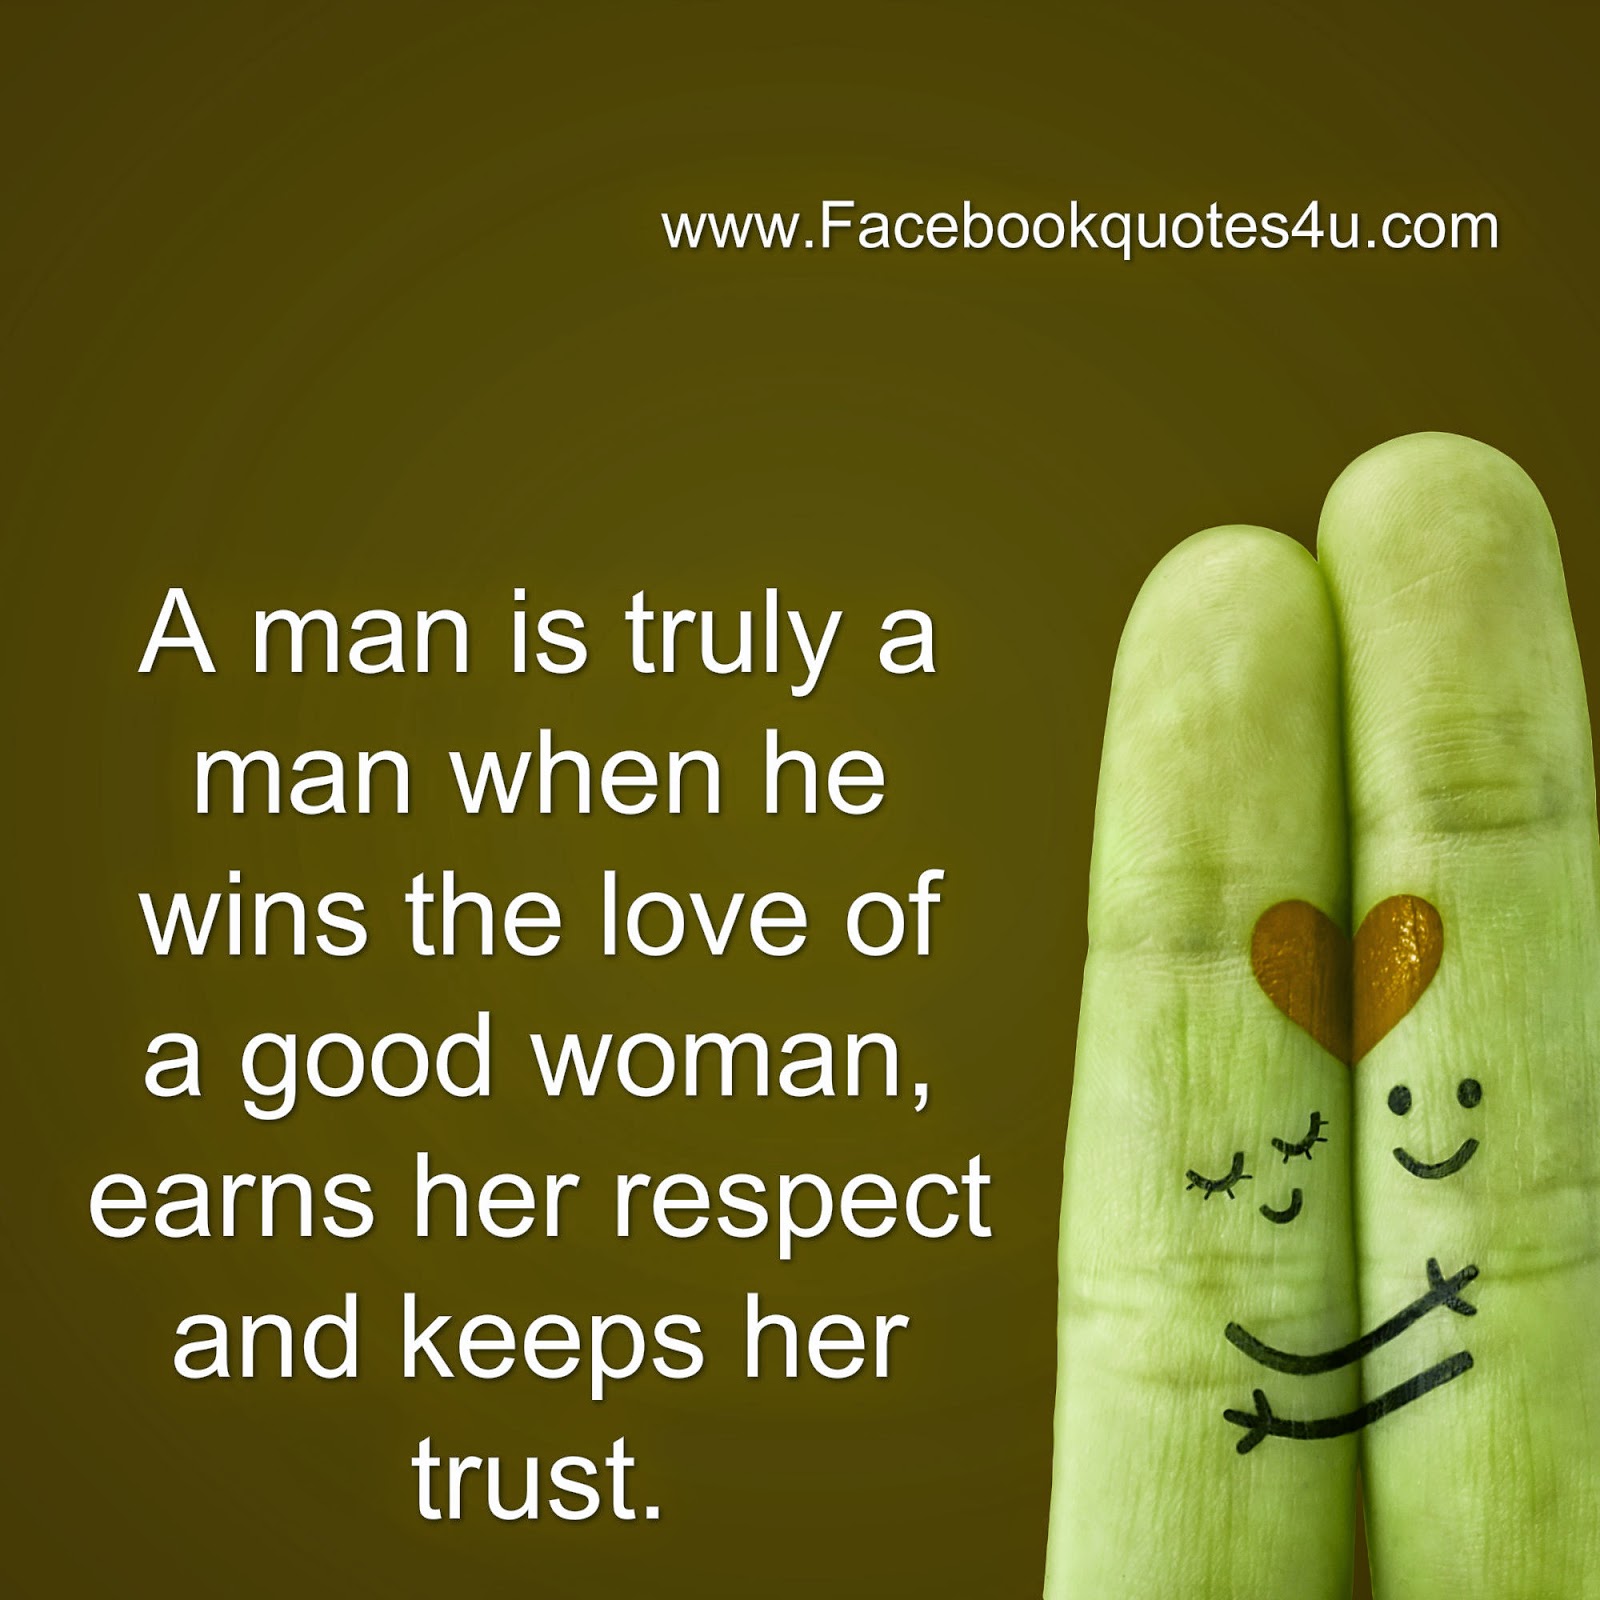 A man who shows respect and good manners to all at all times will win the heart of a woman he loves and this woman will want to respect him